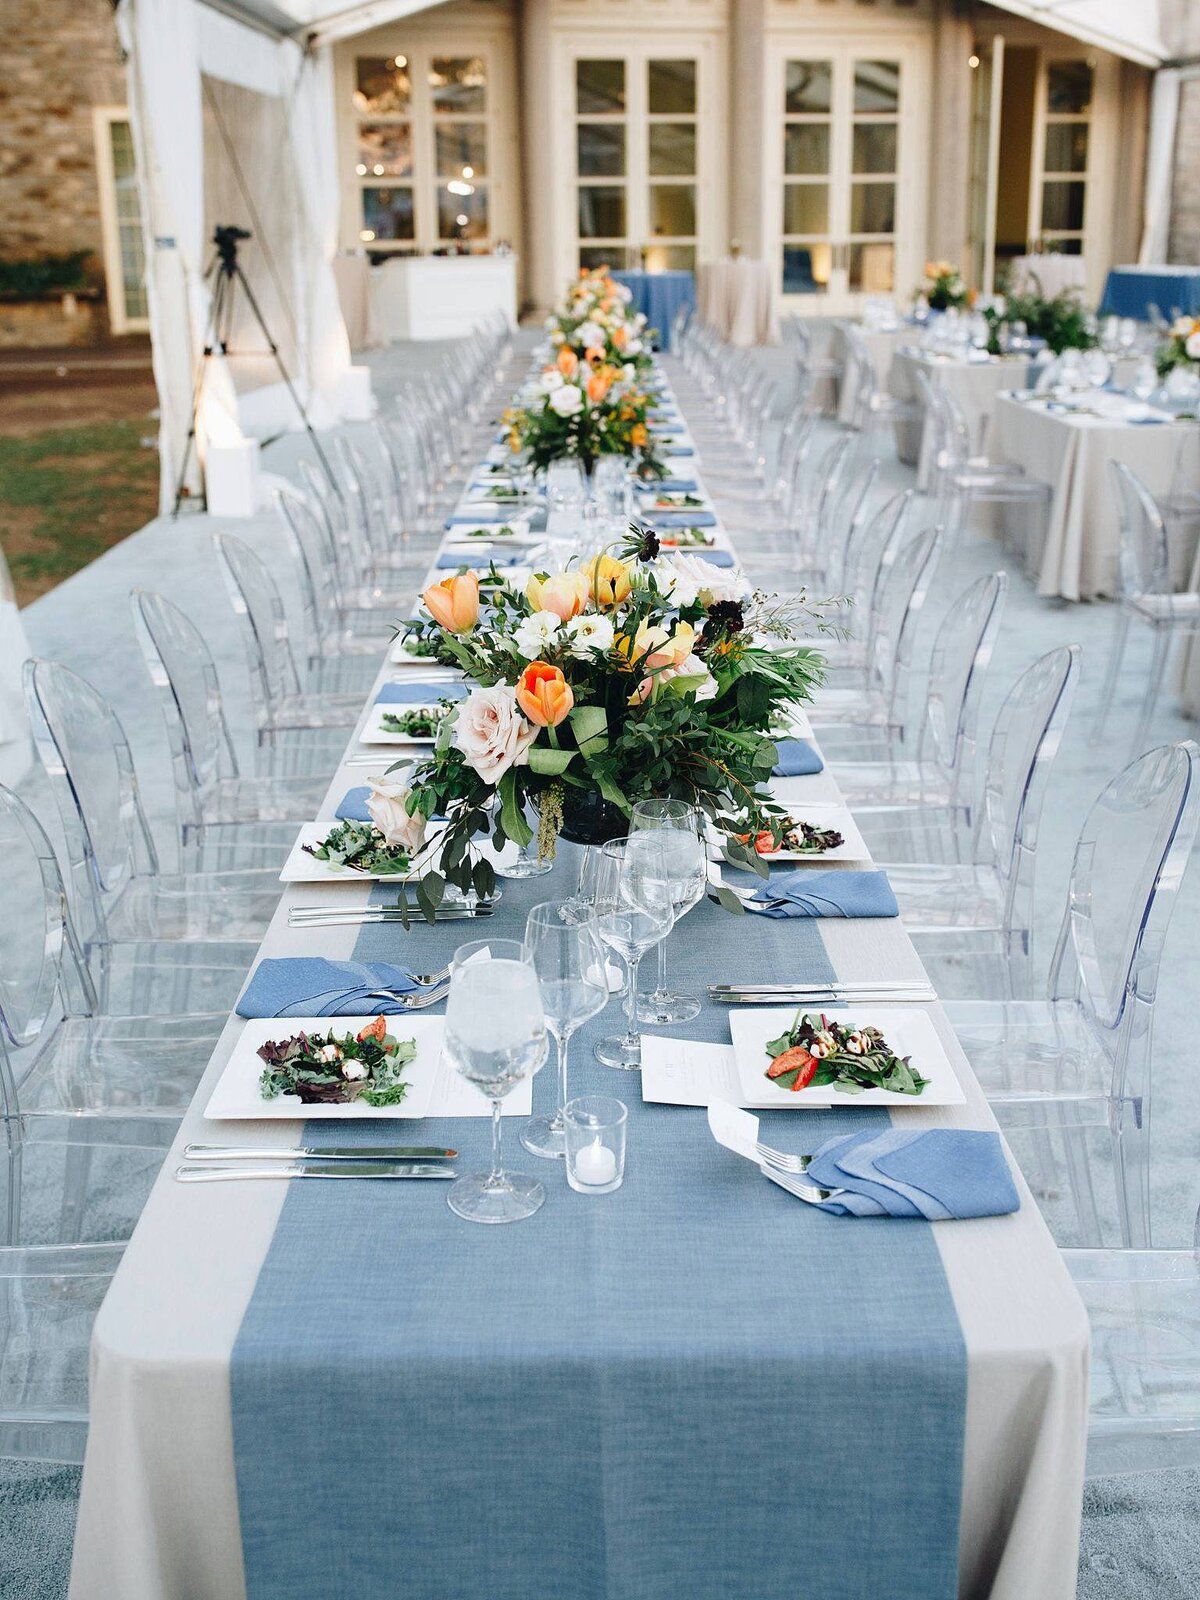 Long table lined with clear acrylic chairs. The table is covered with a long white table cloth and a wide textured table runner decorated with large centerpieces of peach, yellow and orange flowers. The tables are set with green salads on square white plates with silver flatware and a blue fancy folded napkin and long stemmed crystal glasses.